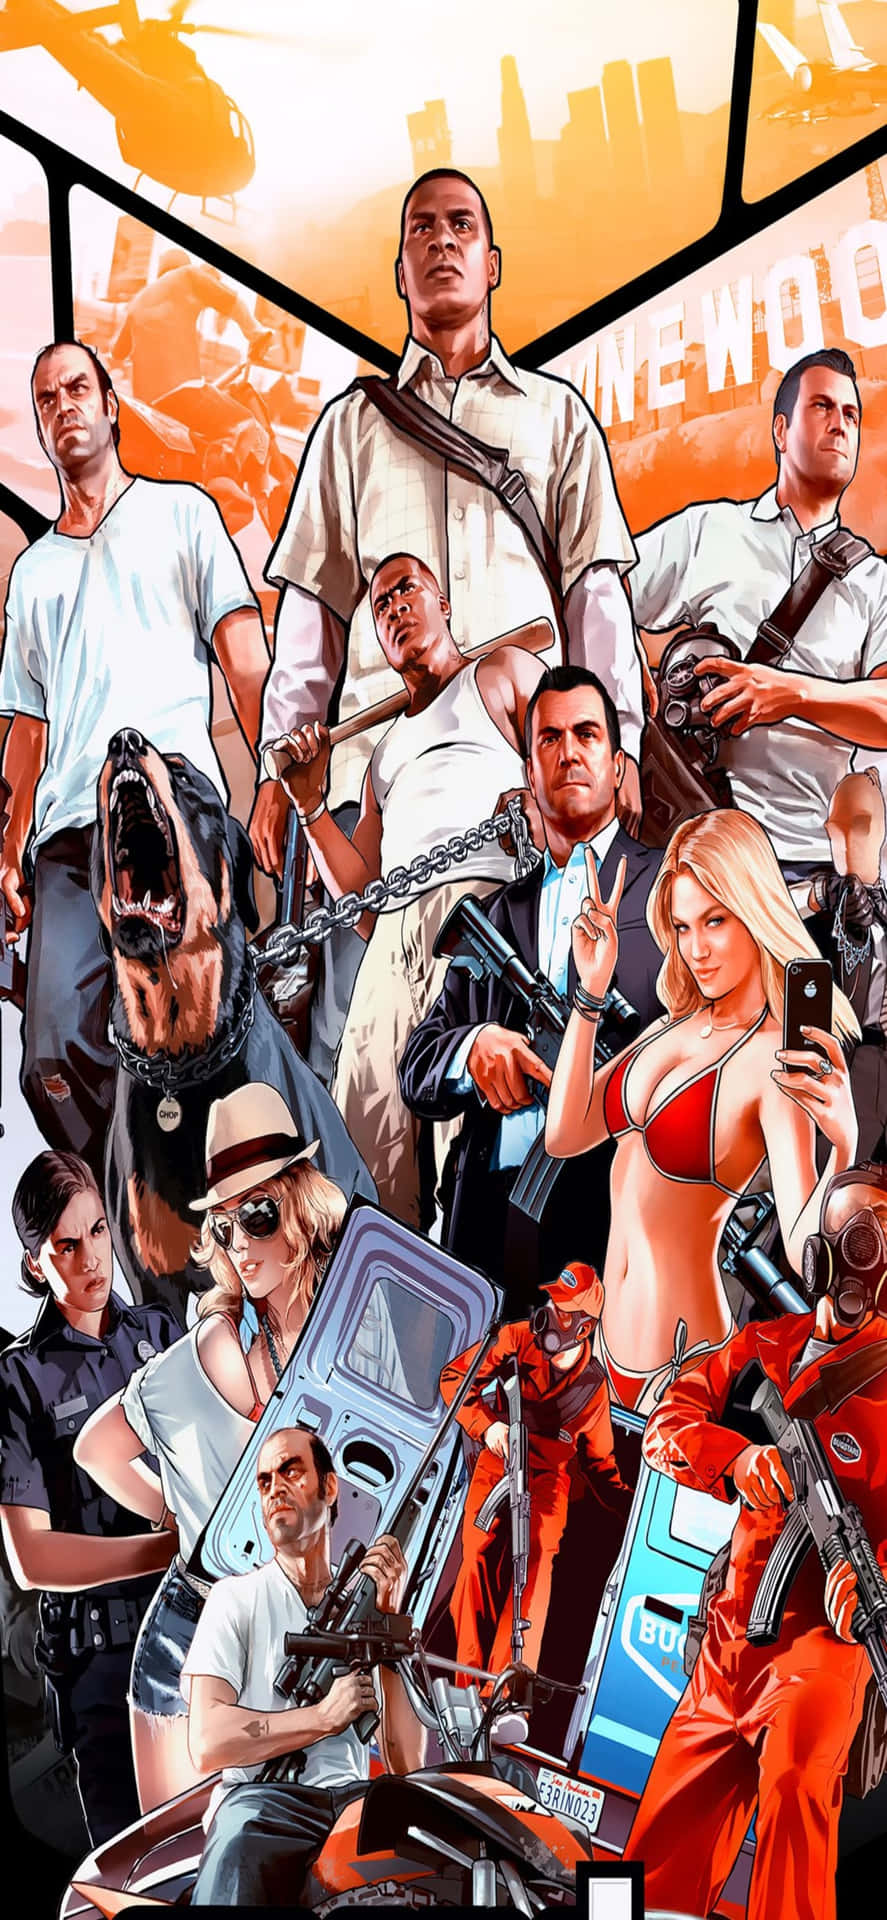 Iphone X Grand Theft Auto V Background&The Character